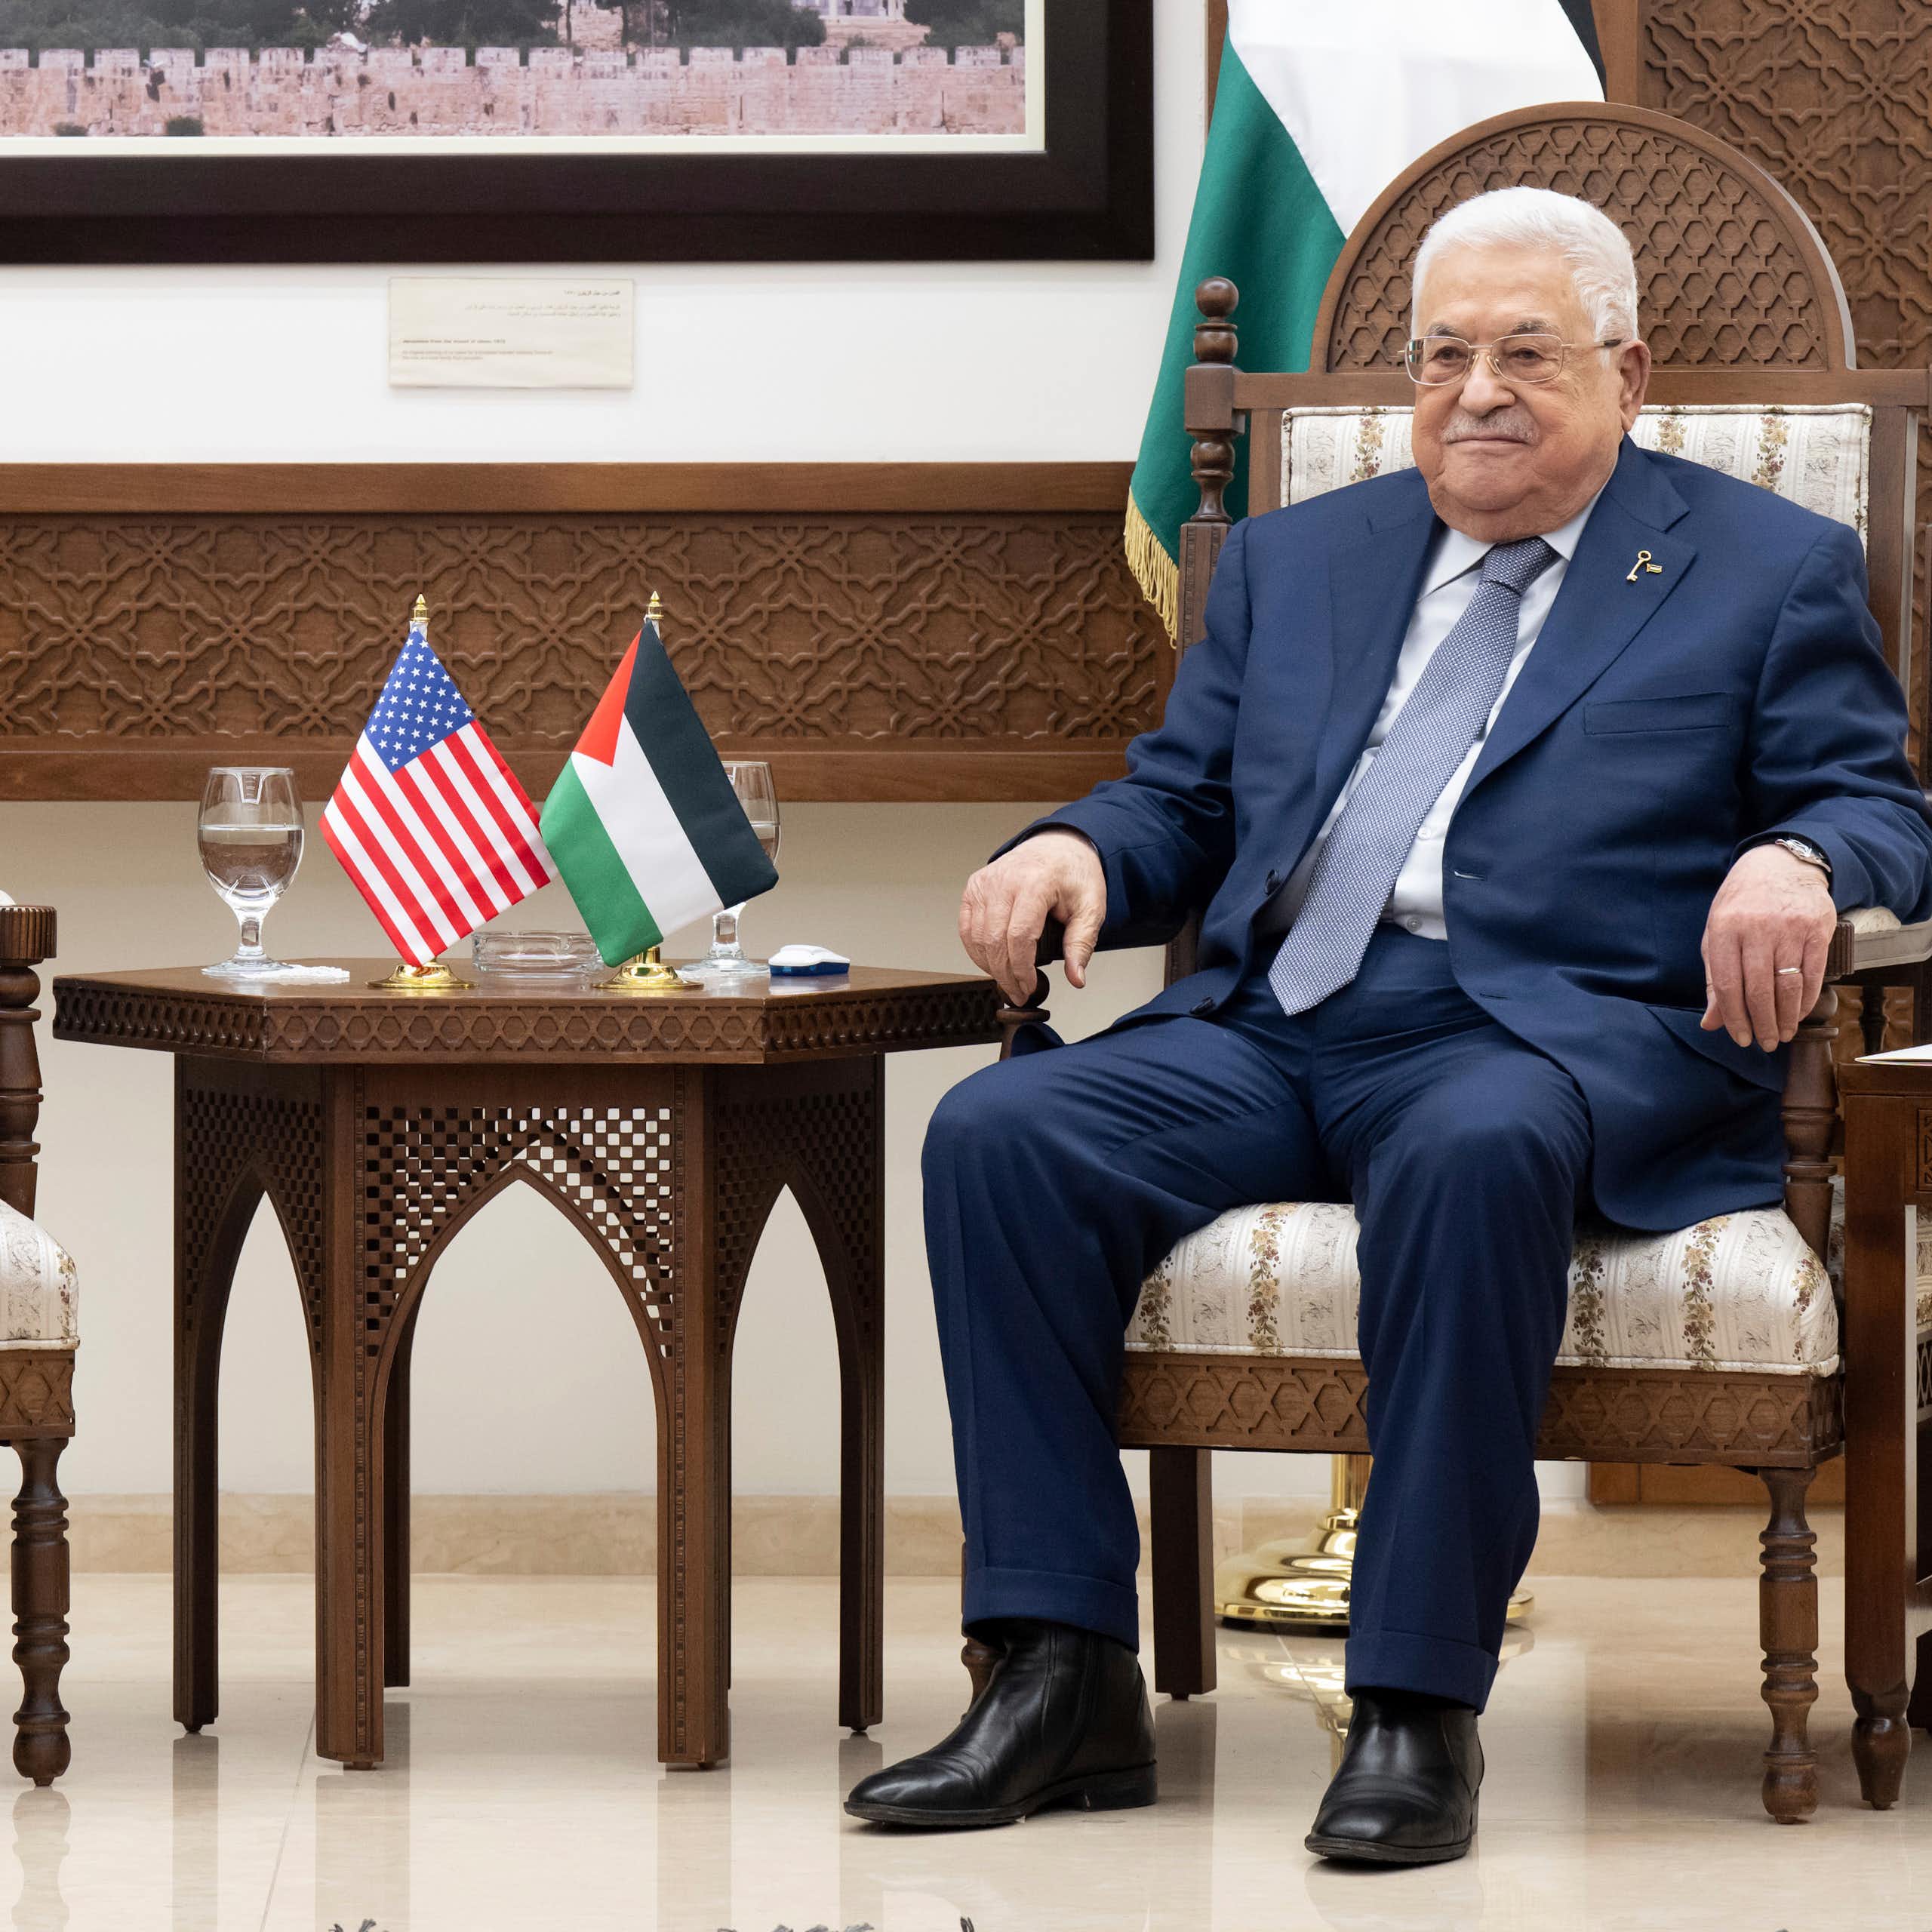 Two men sit with a table between them with Palestinian and US flags on.